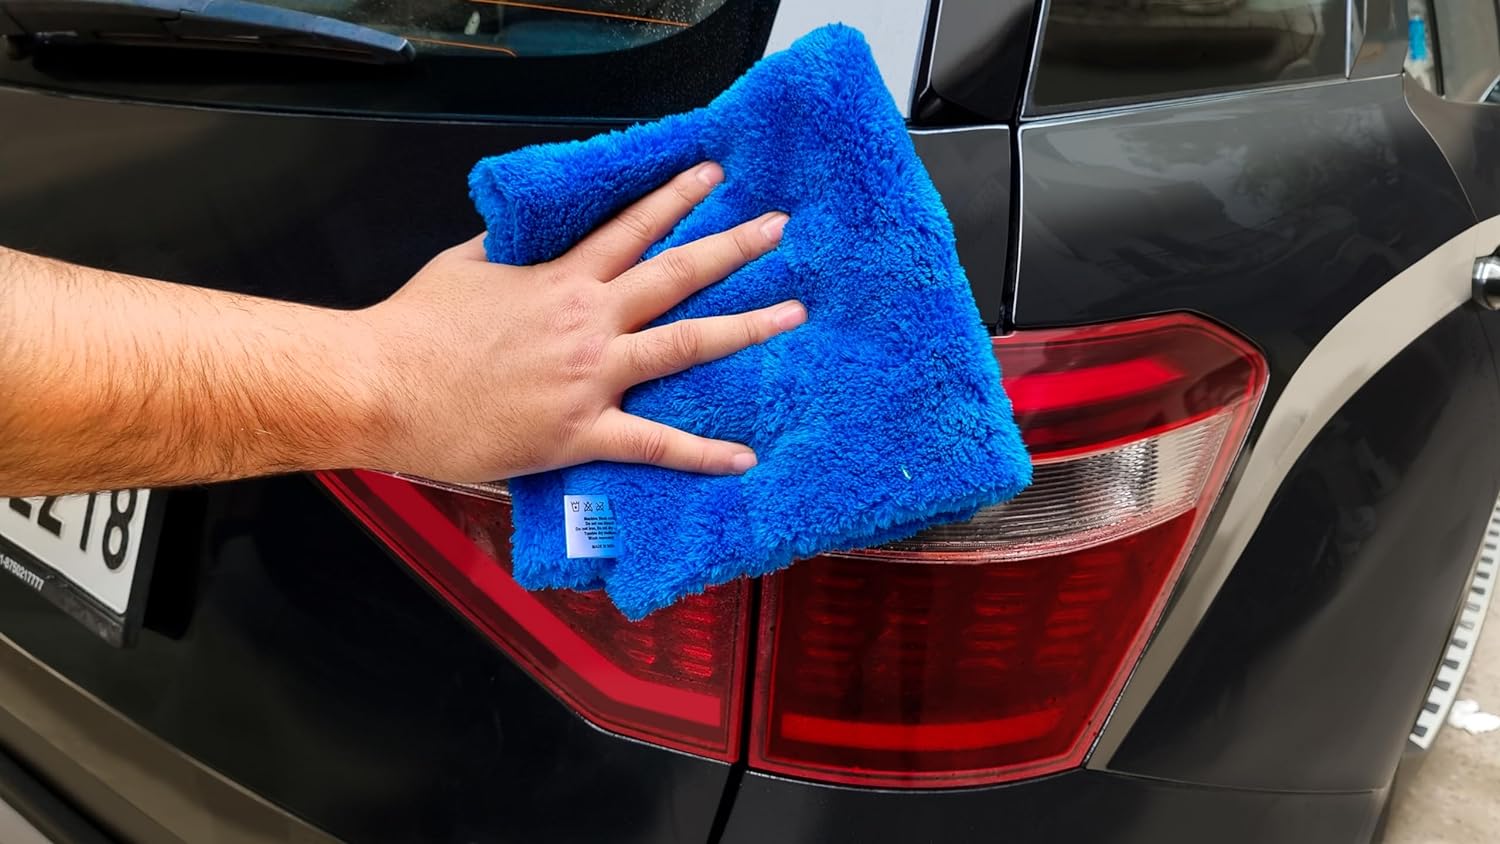 for Washing, Detailing of Cars